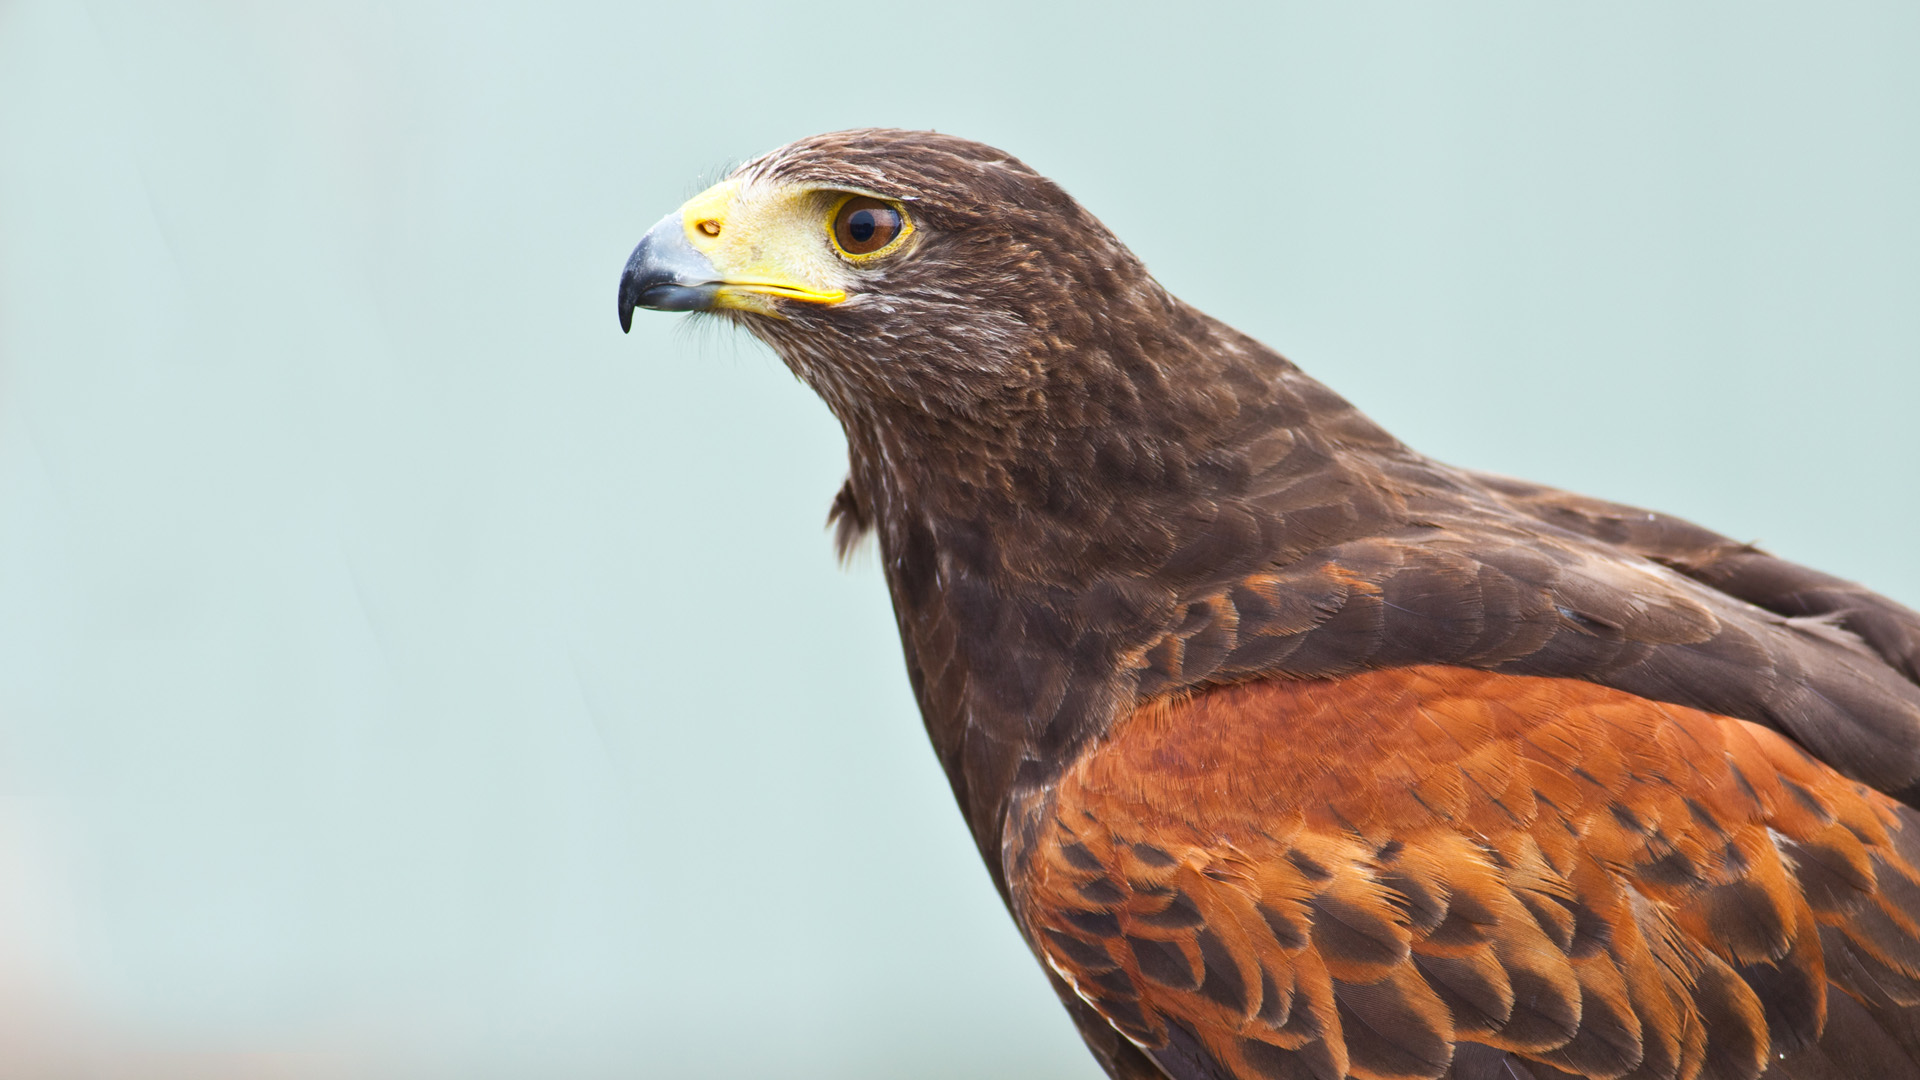 A side view of a harris hawk turned to the side